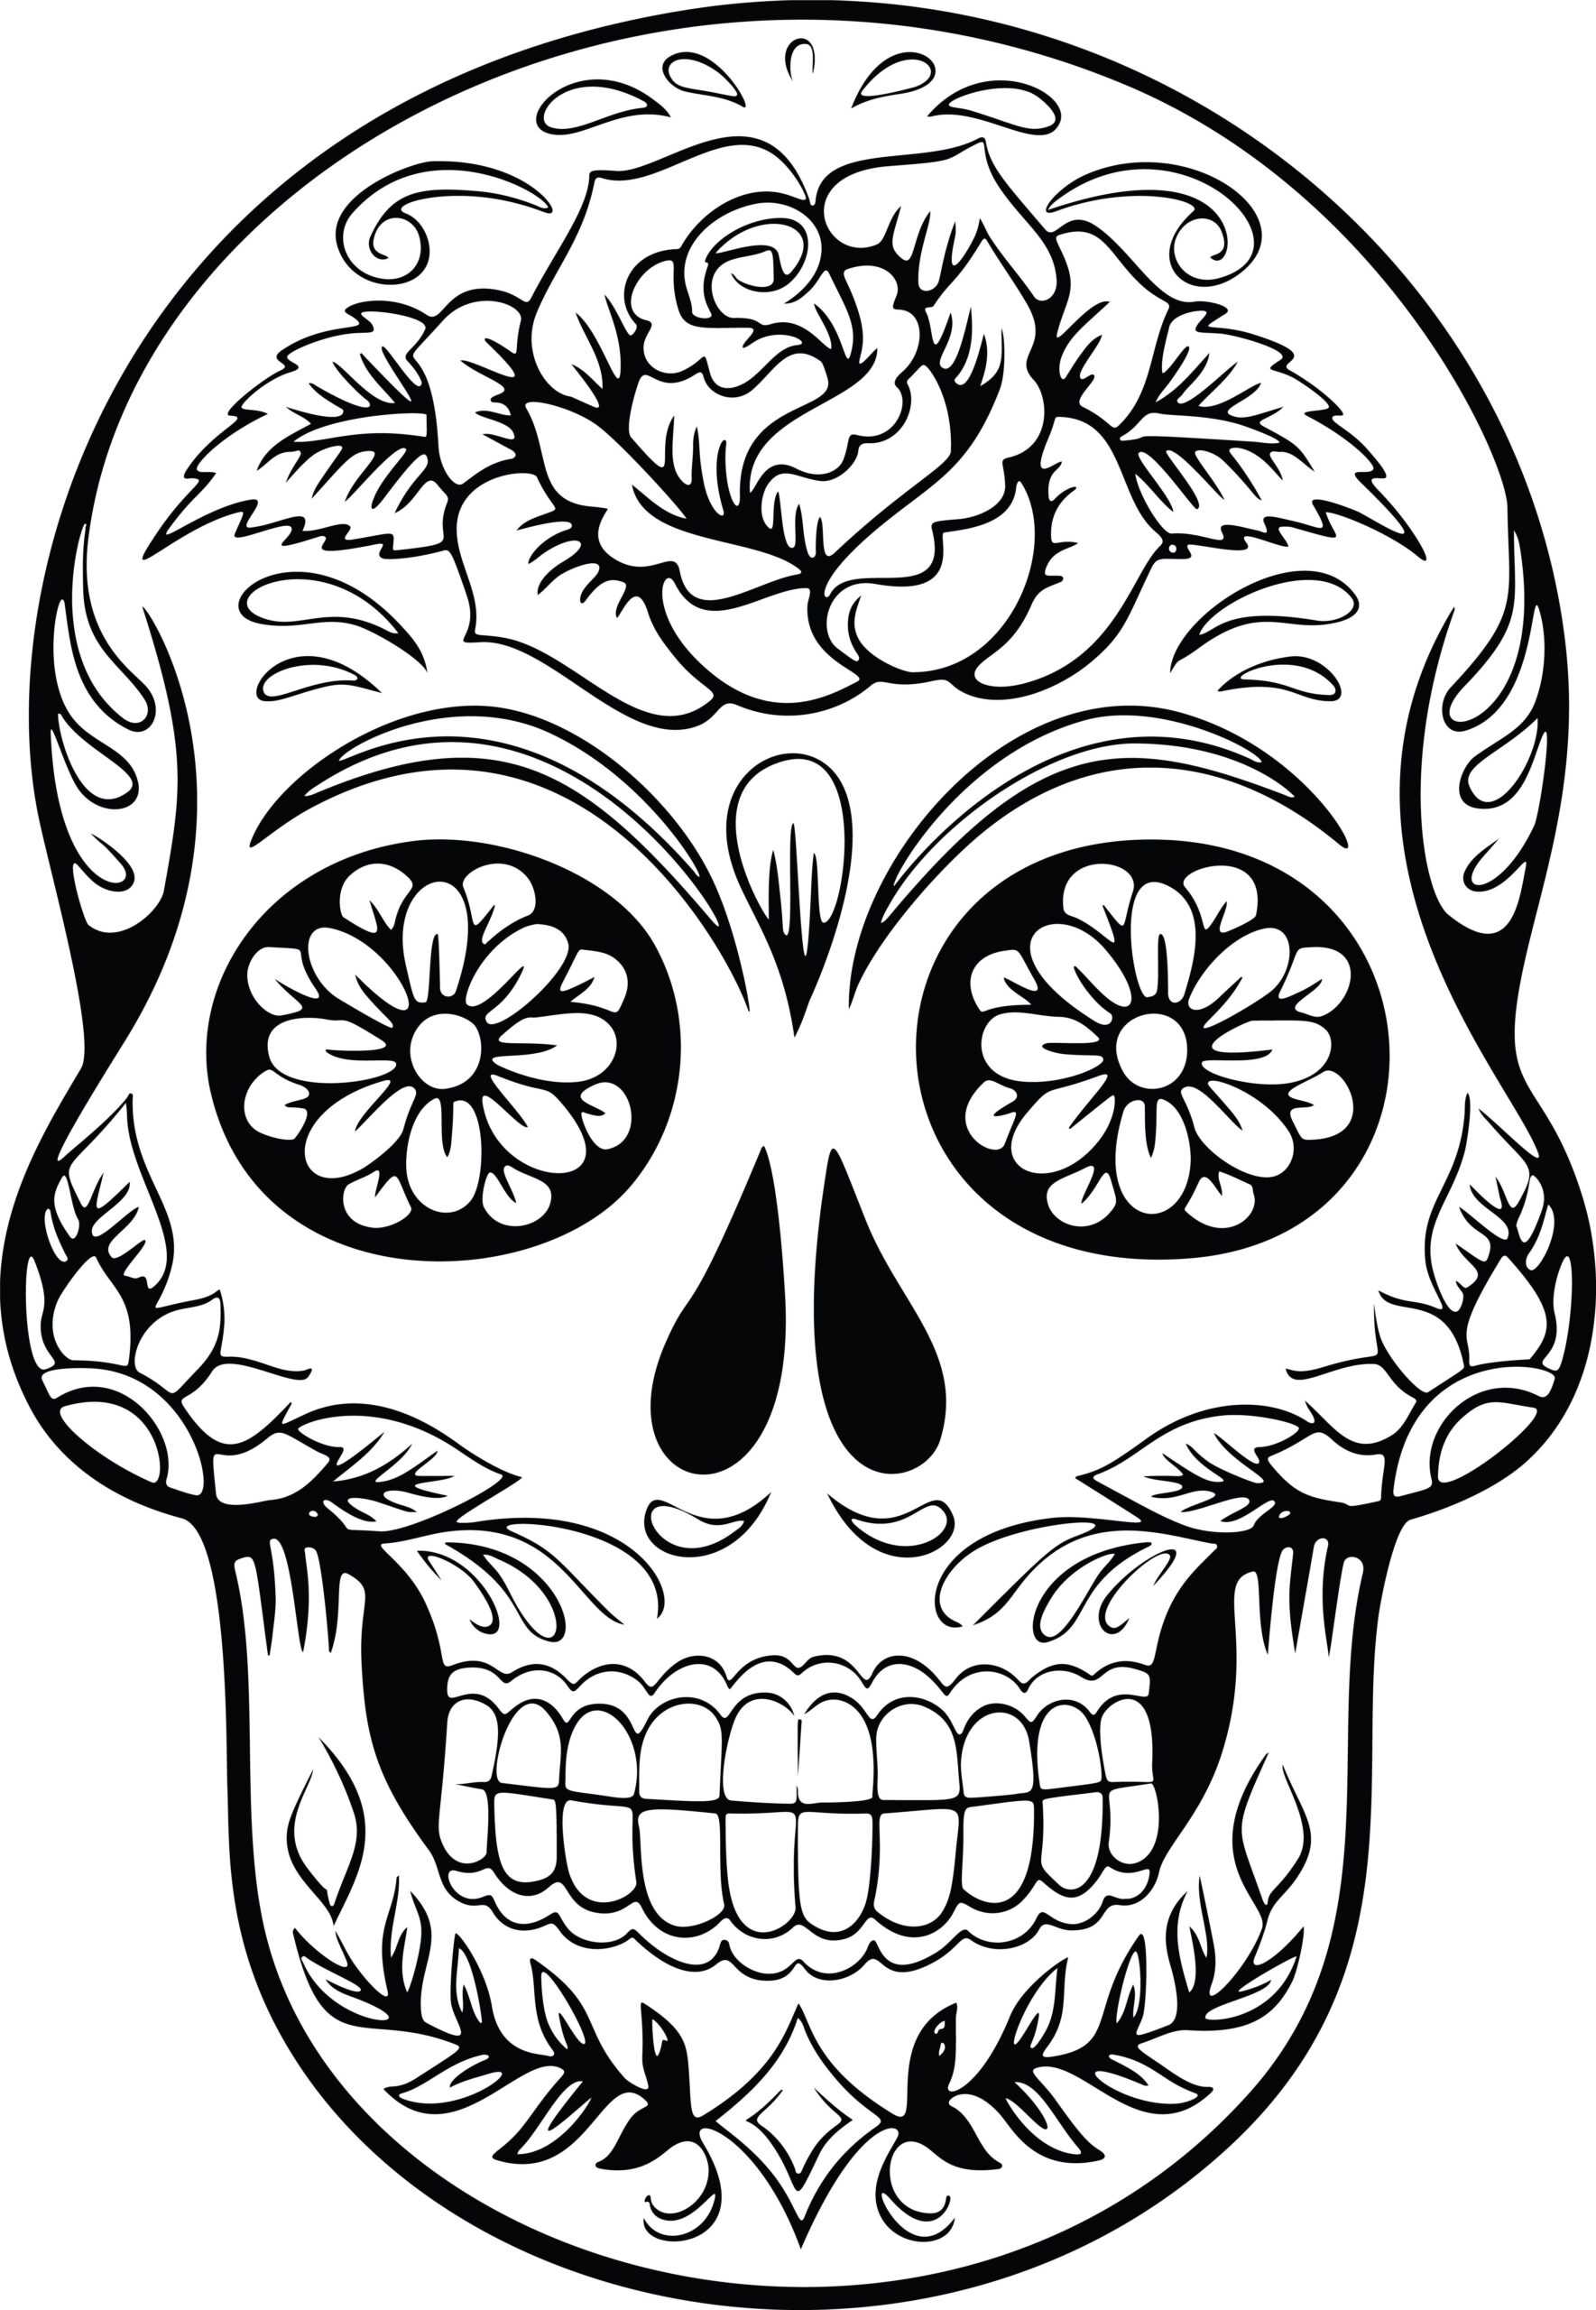 Best Coloring : Free Skull Anatomy Pages Muscular System With Blank Sugar Skull Template